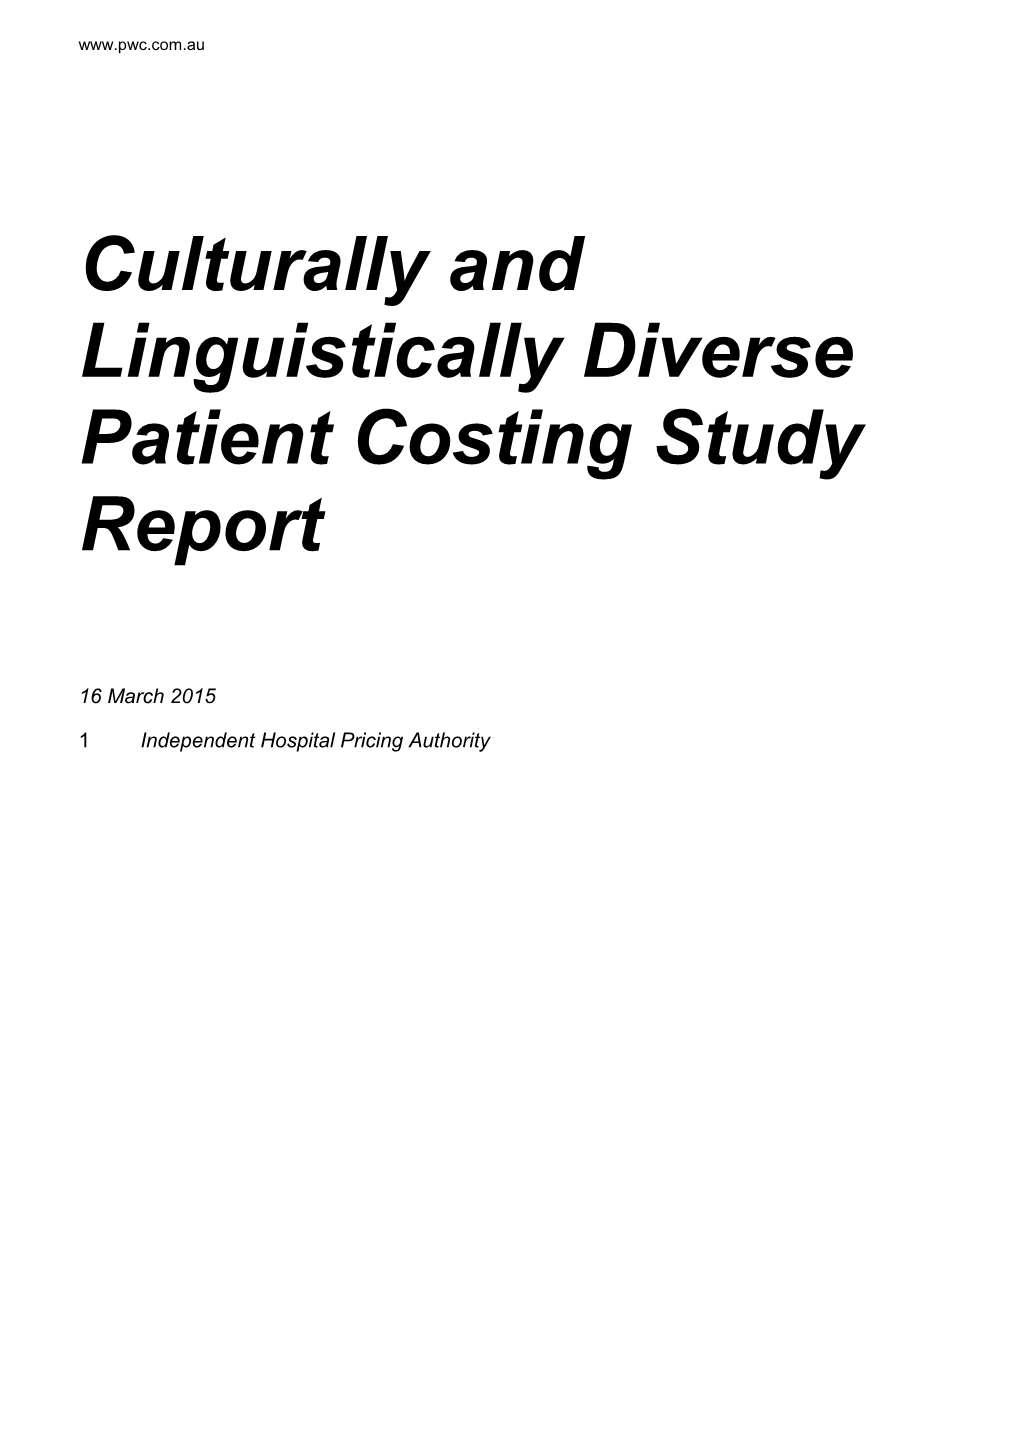 Culturally and Linguistically Diverse Patient Costing Study